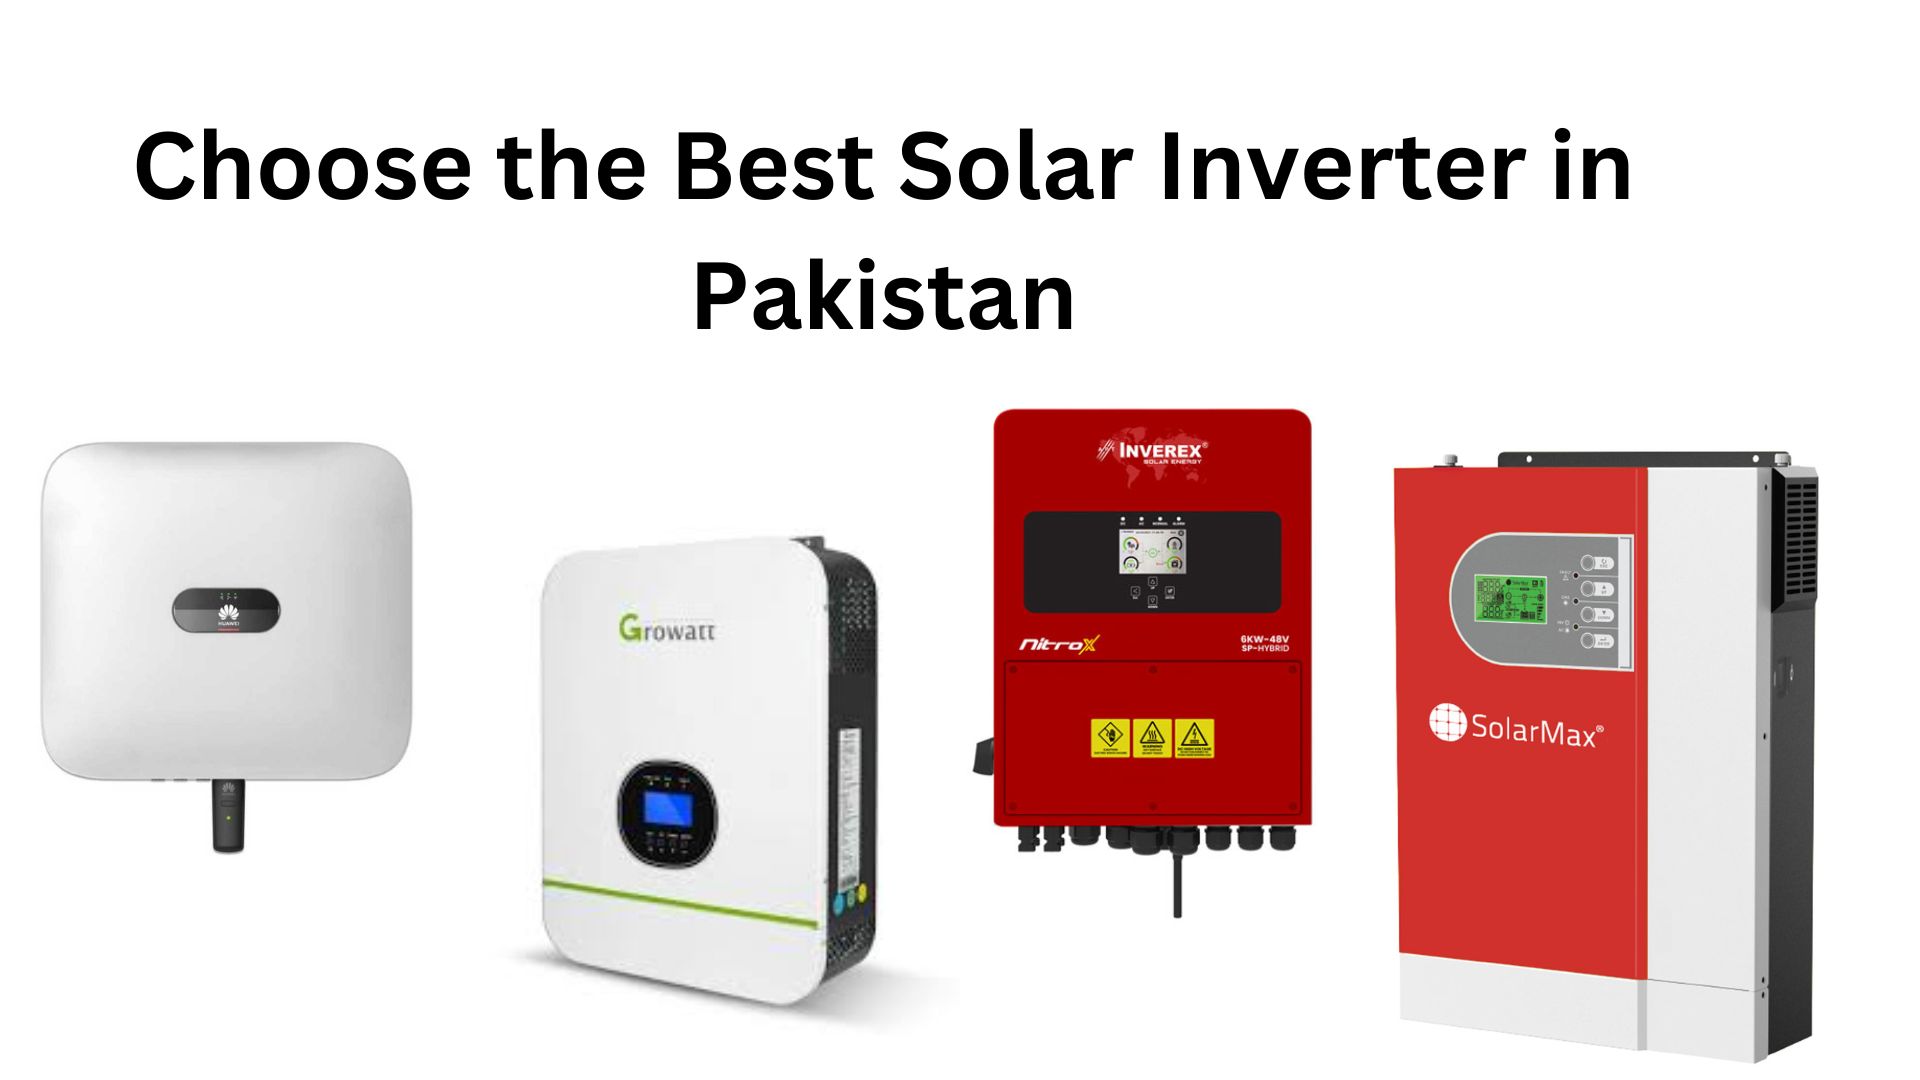 How to Choose the Best Solar Inverter for your Home in Pakistan